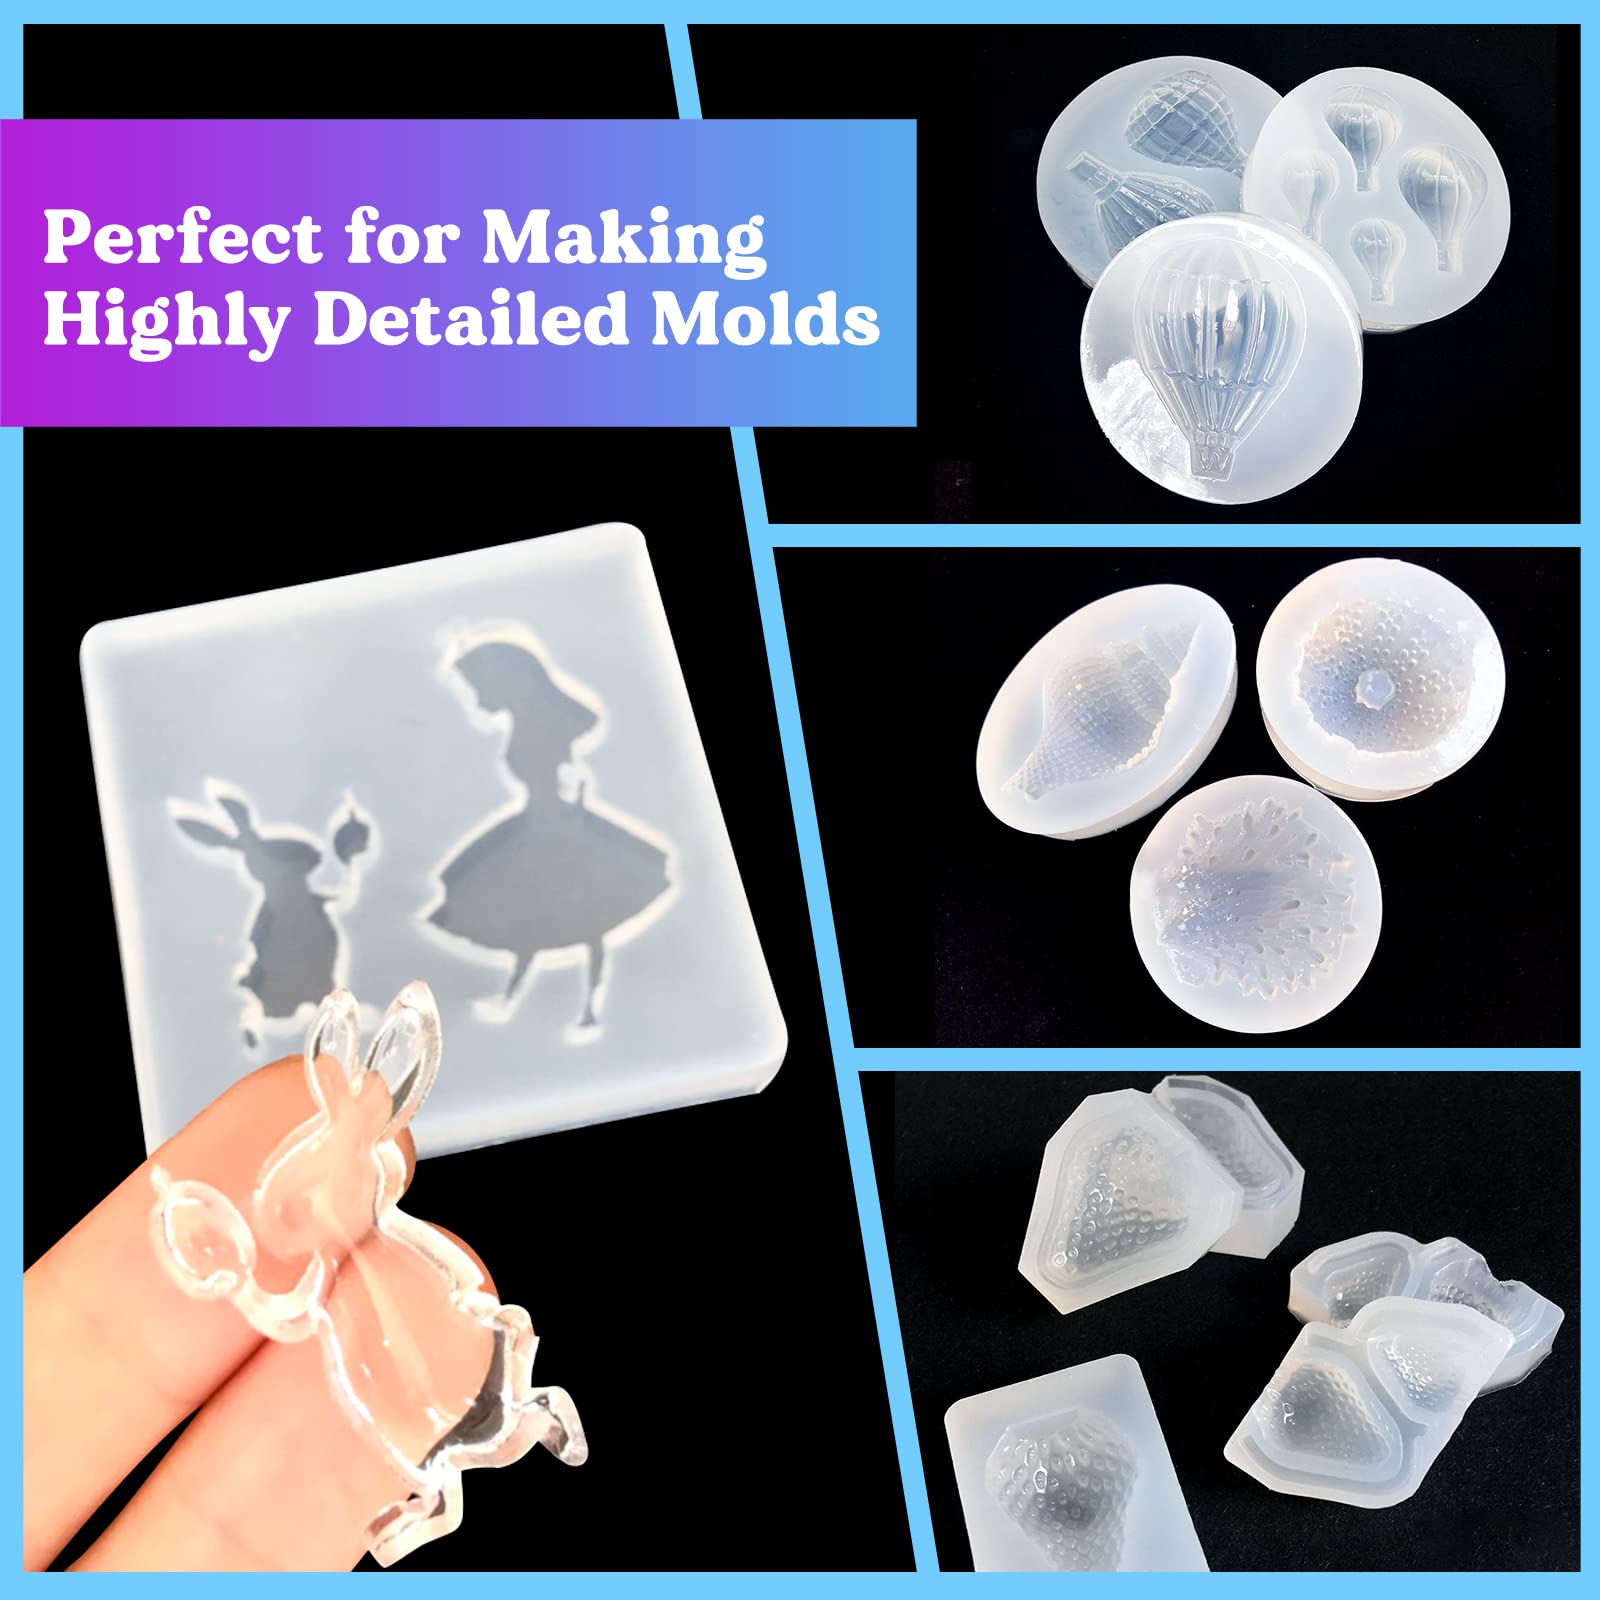 LET'S RESIN Resin Kits and Molds Complete Set, 16OZ Resin Molds Silicone  Kit Bundle with Sphere, Pyramid Molds, Resin Epoxy Starter Kit for Beginner